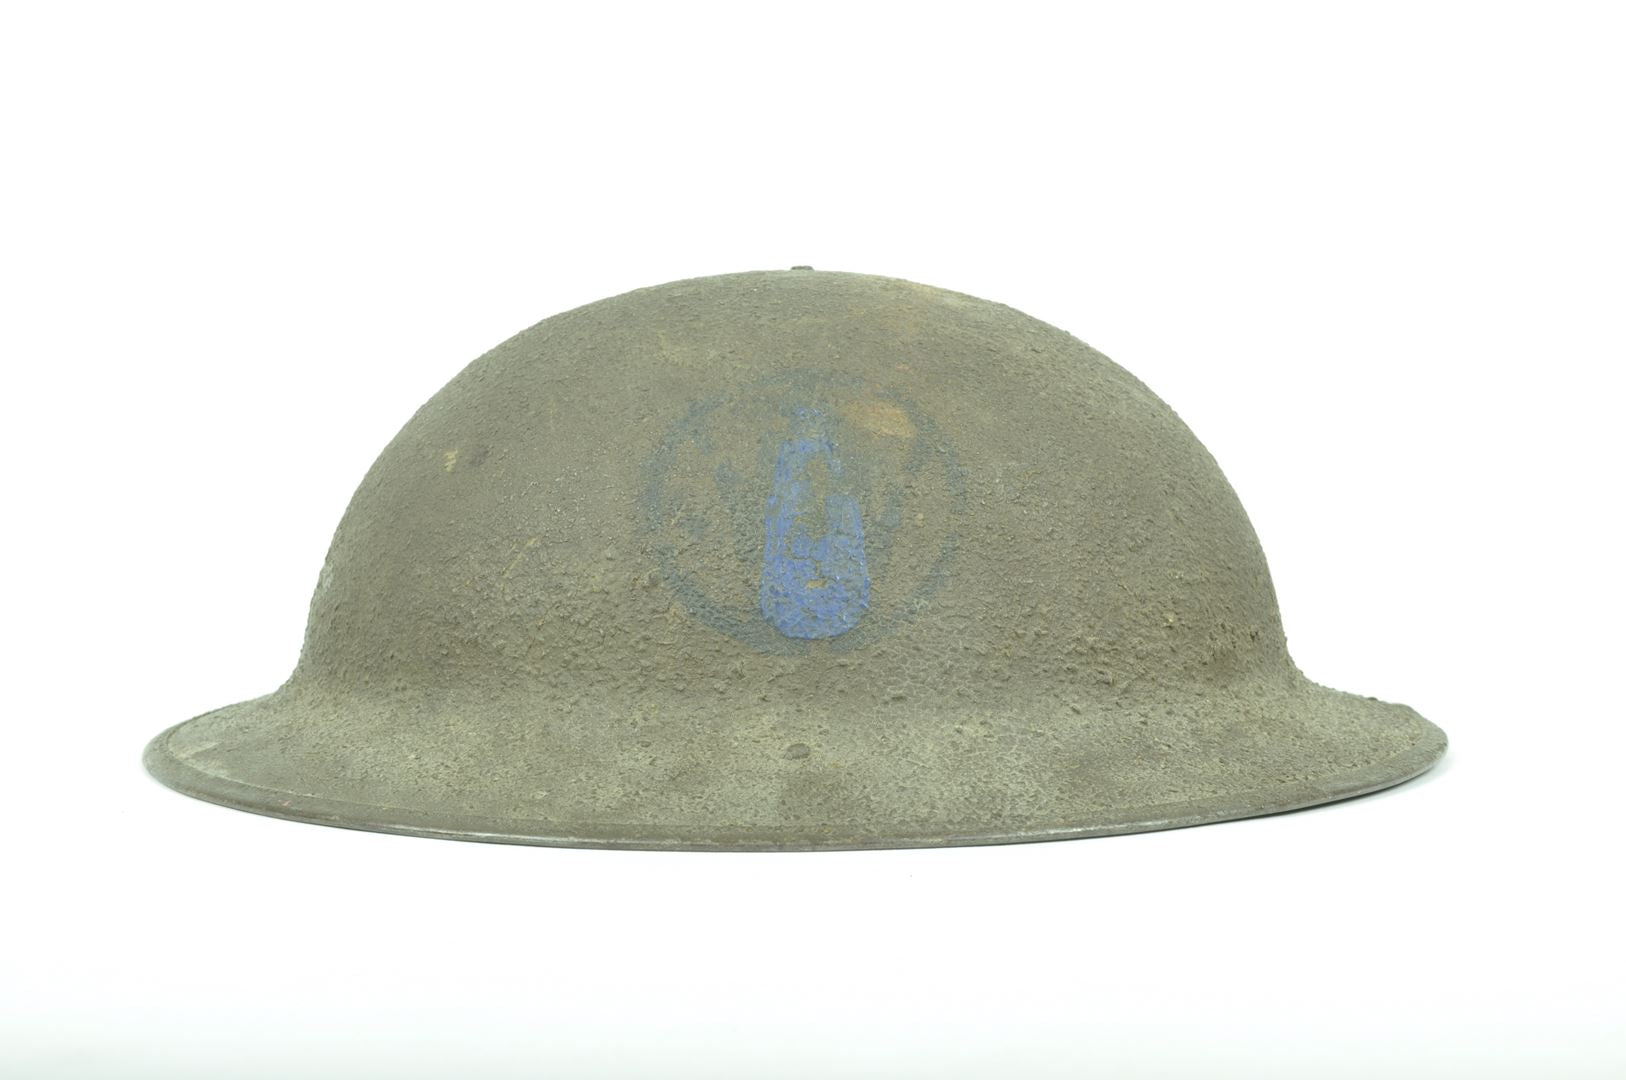 Casque US 17 double insignes 89th infantry division